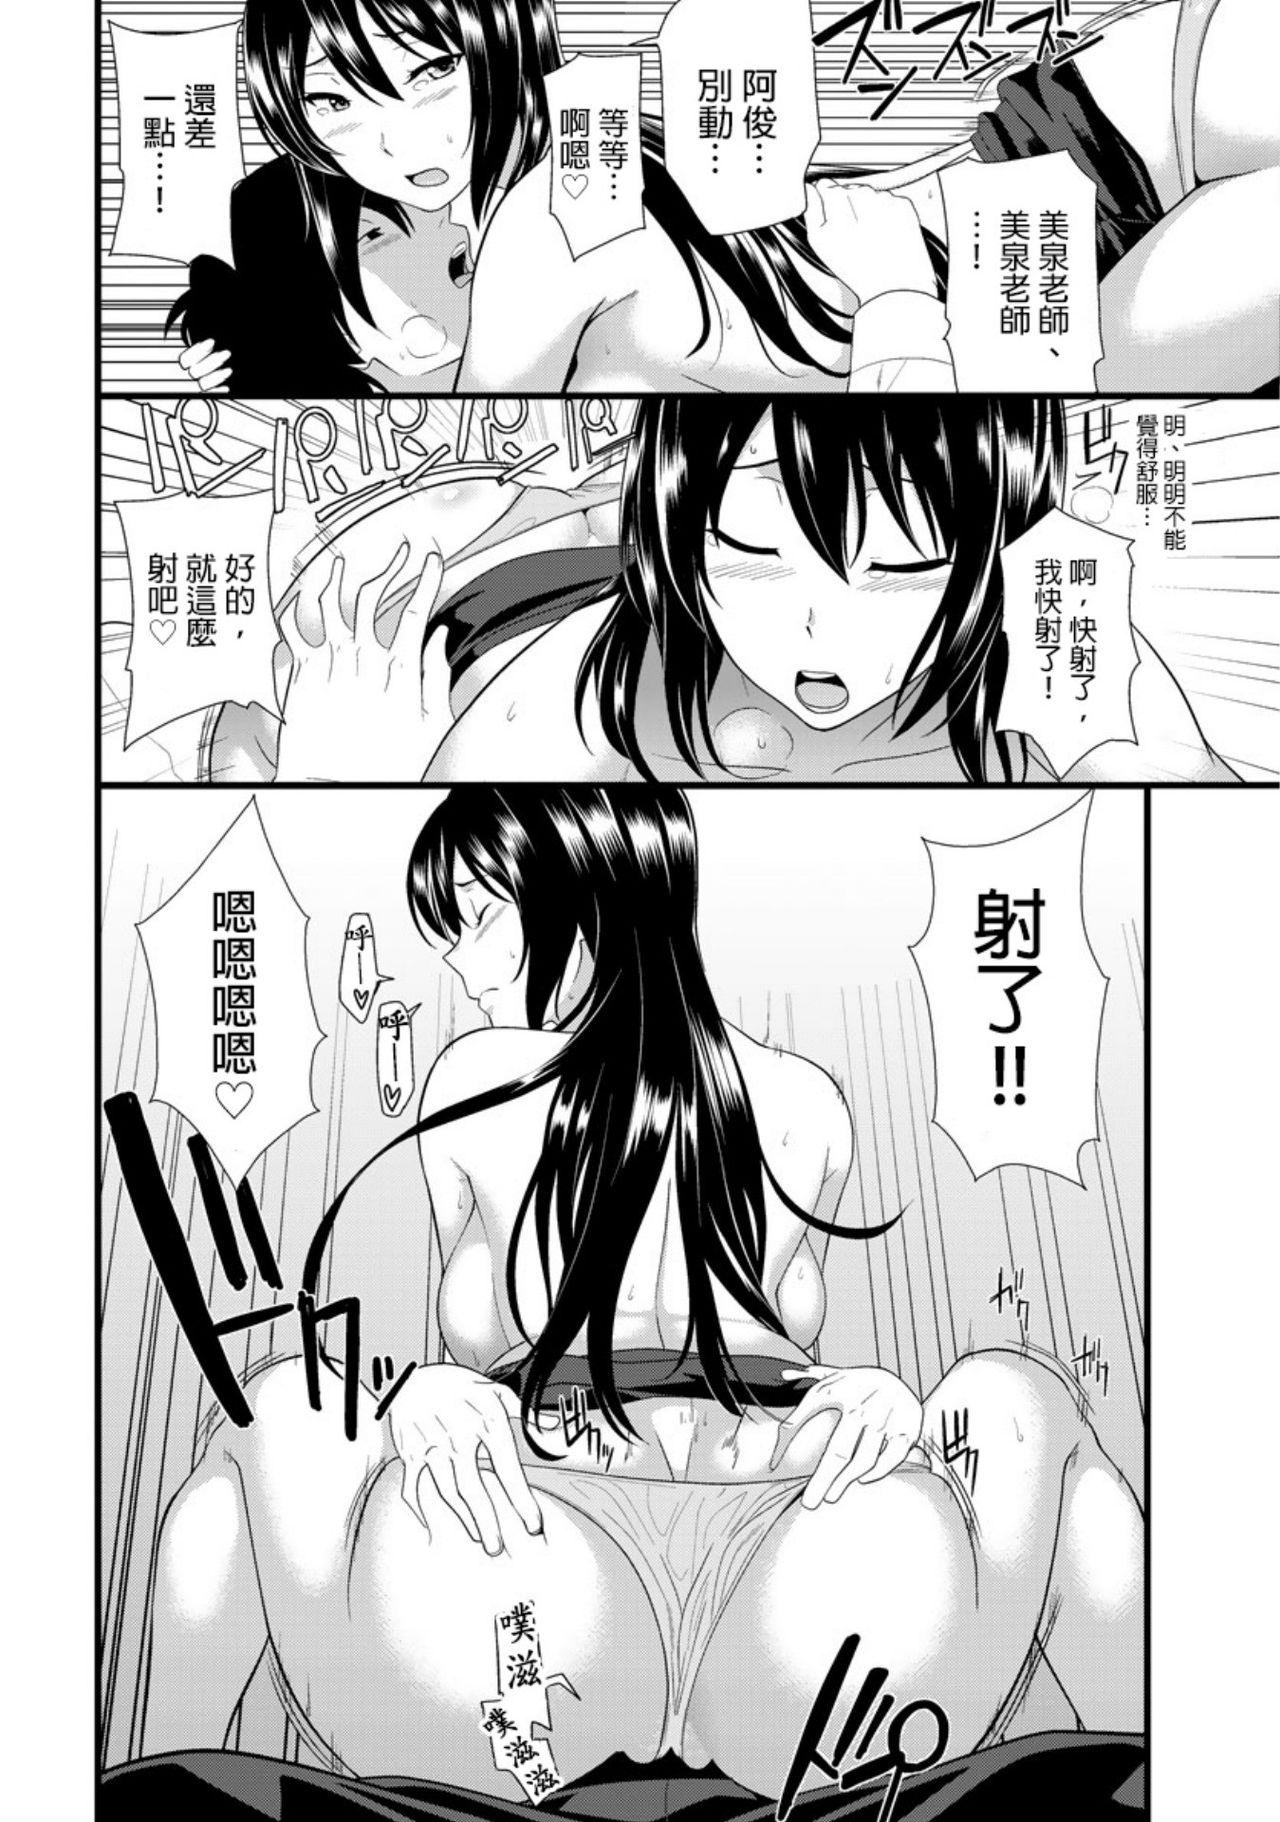 Bucetinha 教え子に襲ワレル人妻は抵抗できなくて Ch.2 Closeups - Page 11